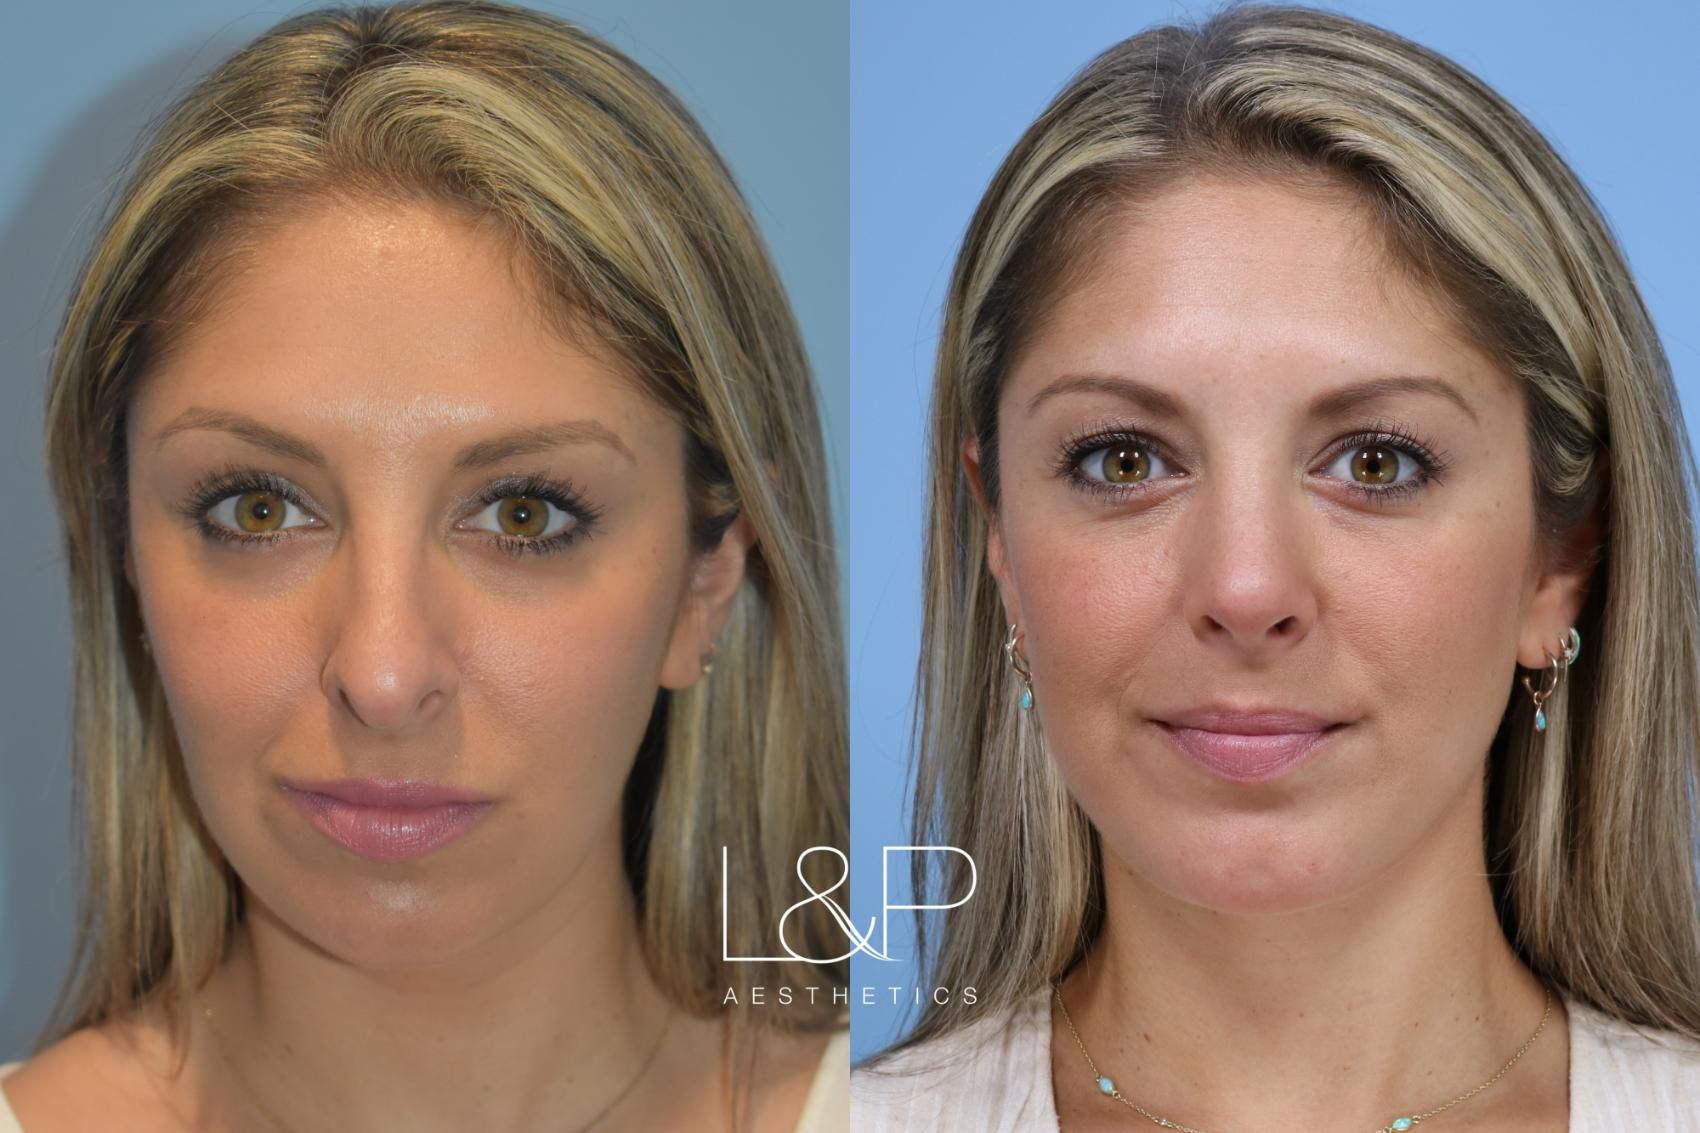 Midline Neck Lift before and after treatment